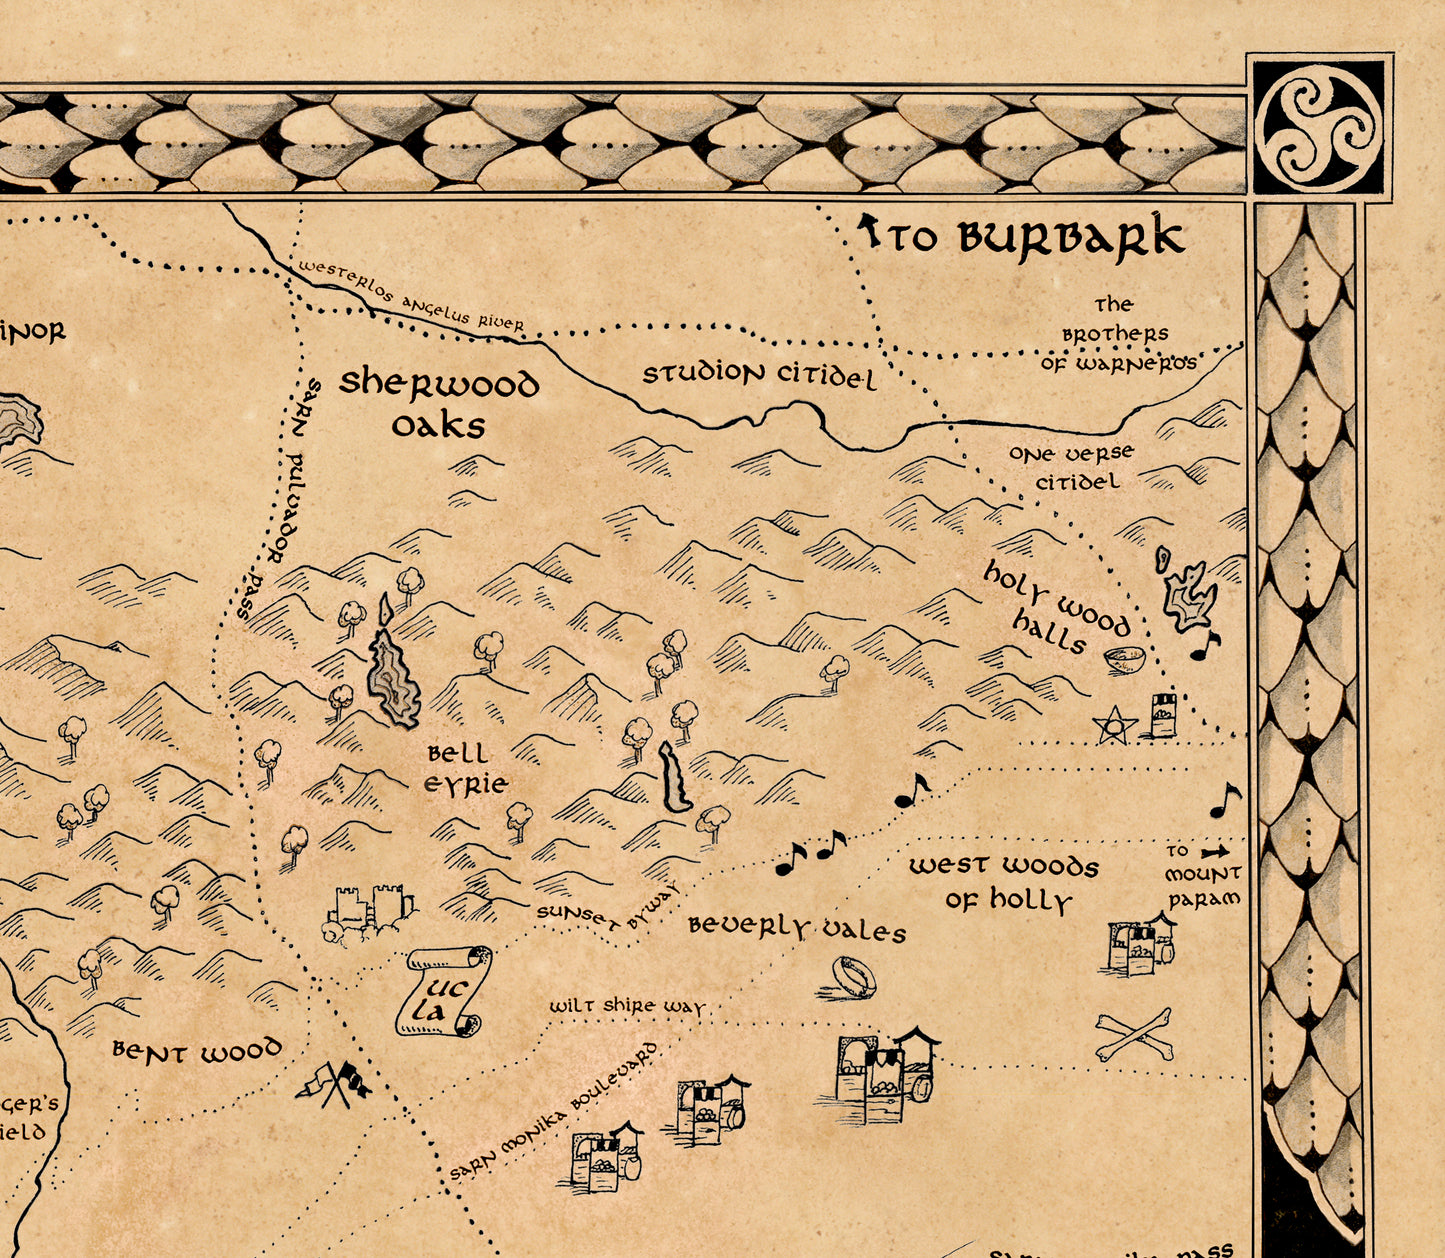 Fantasy Map of West Los Angeles in LotR Style